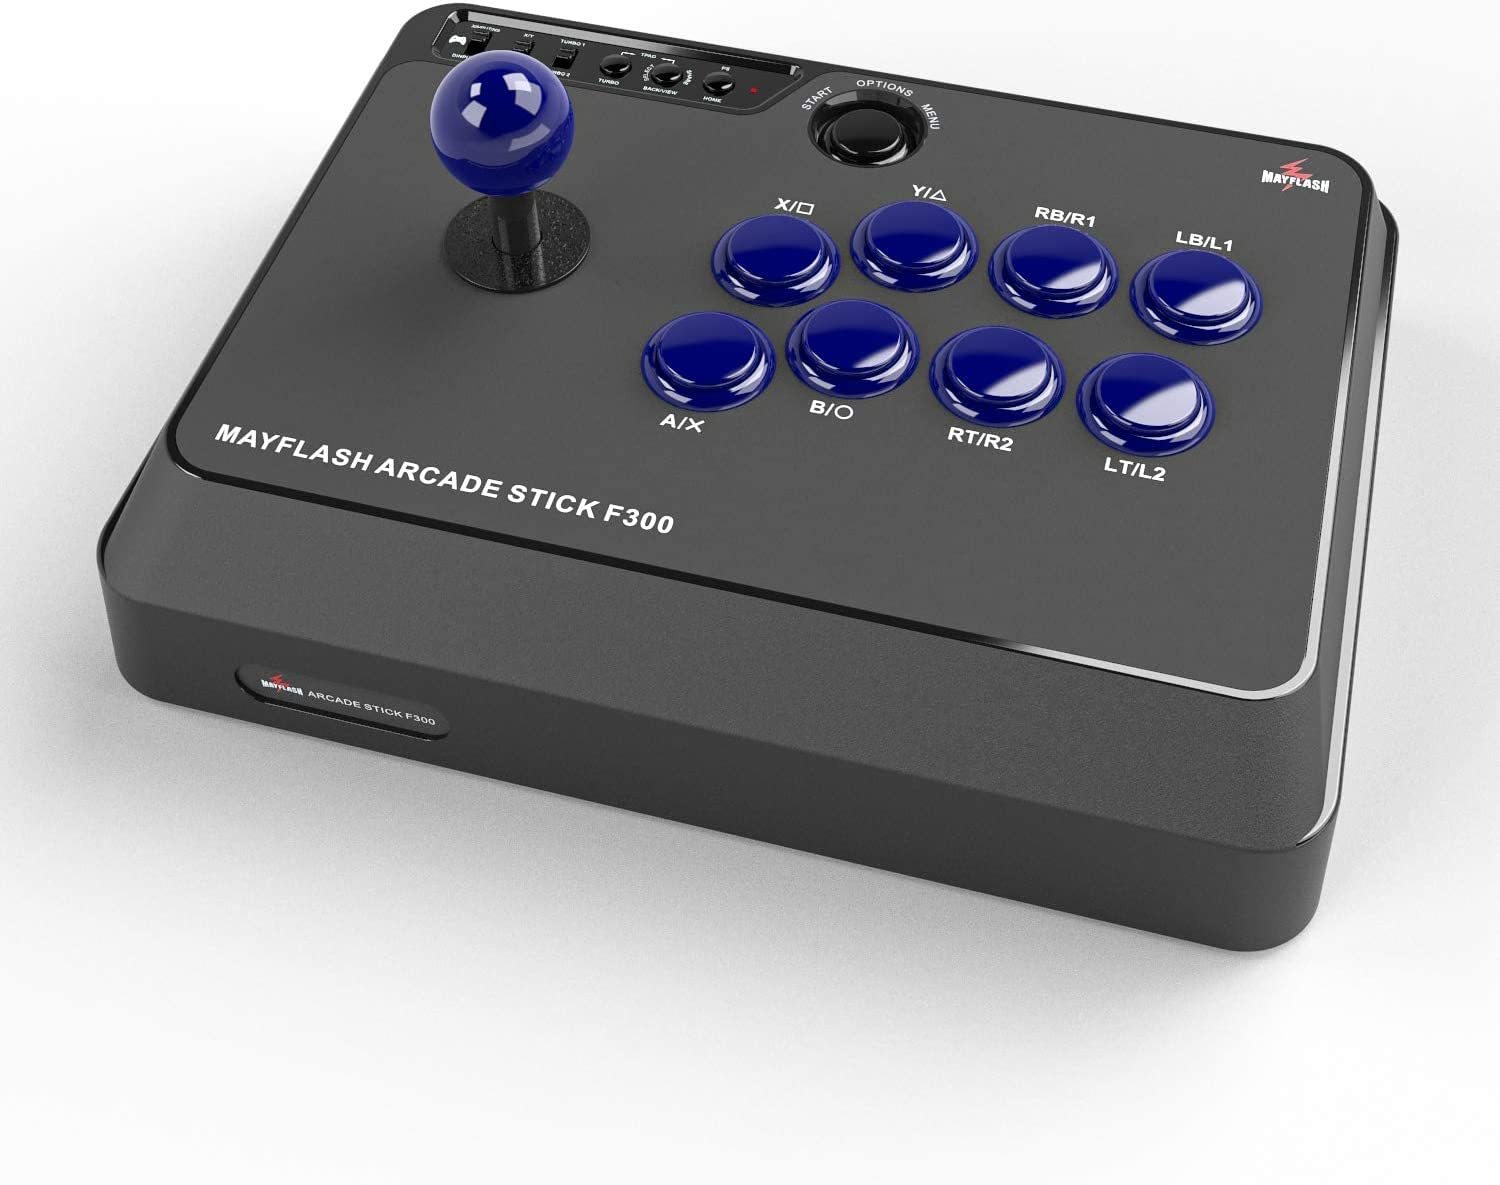 Primary image for Mayflash F300 Arcade Fight Stick Joystick for Xbox Series X, PS4,PS3, Xbox One,